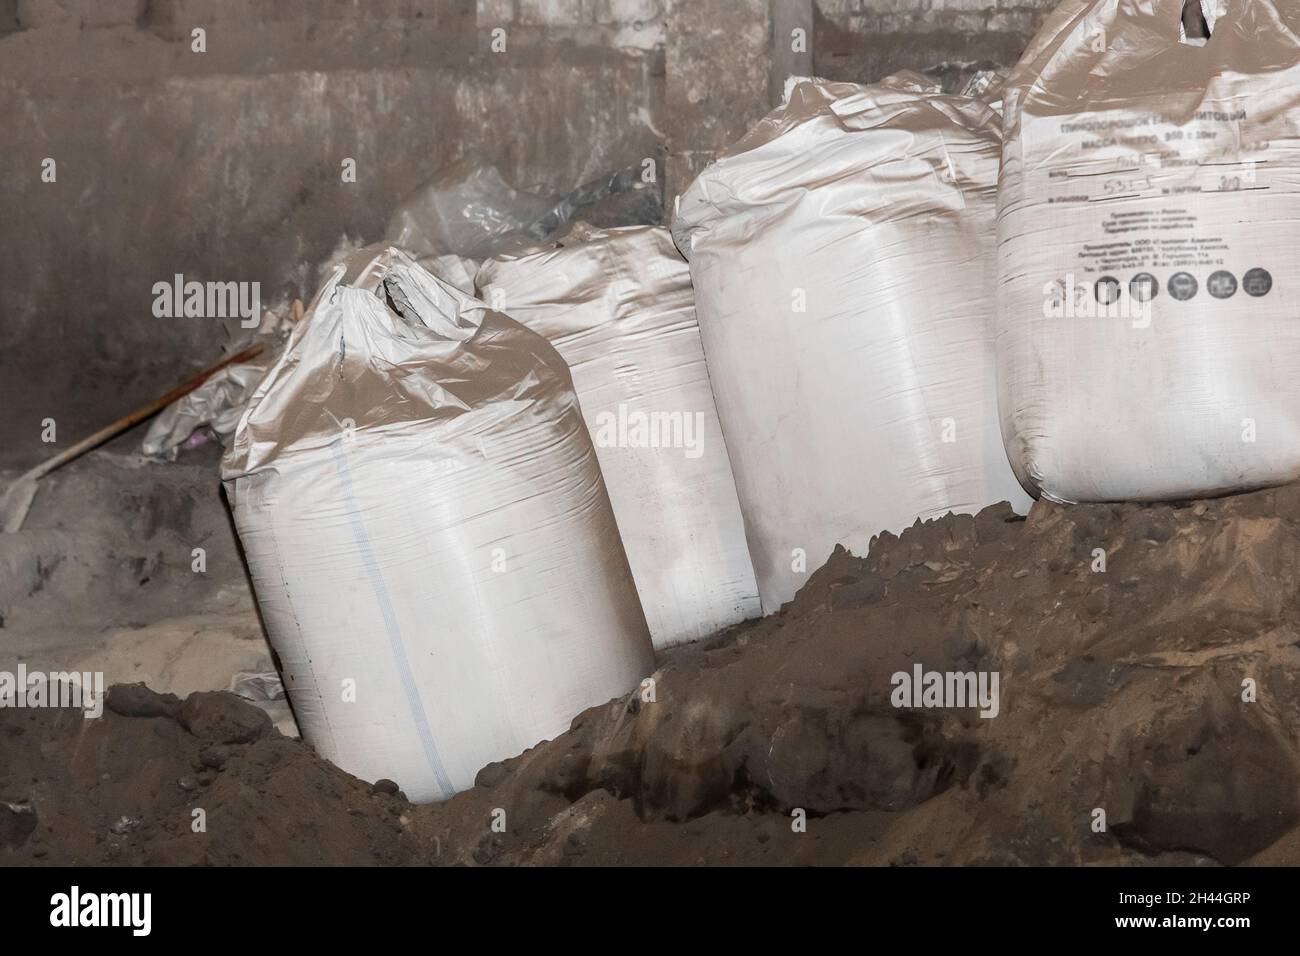 Bentonite clay powder packed in bags at an industrial plant for processing sand, soil and land. Stock Photo